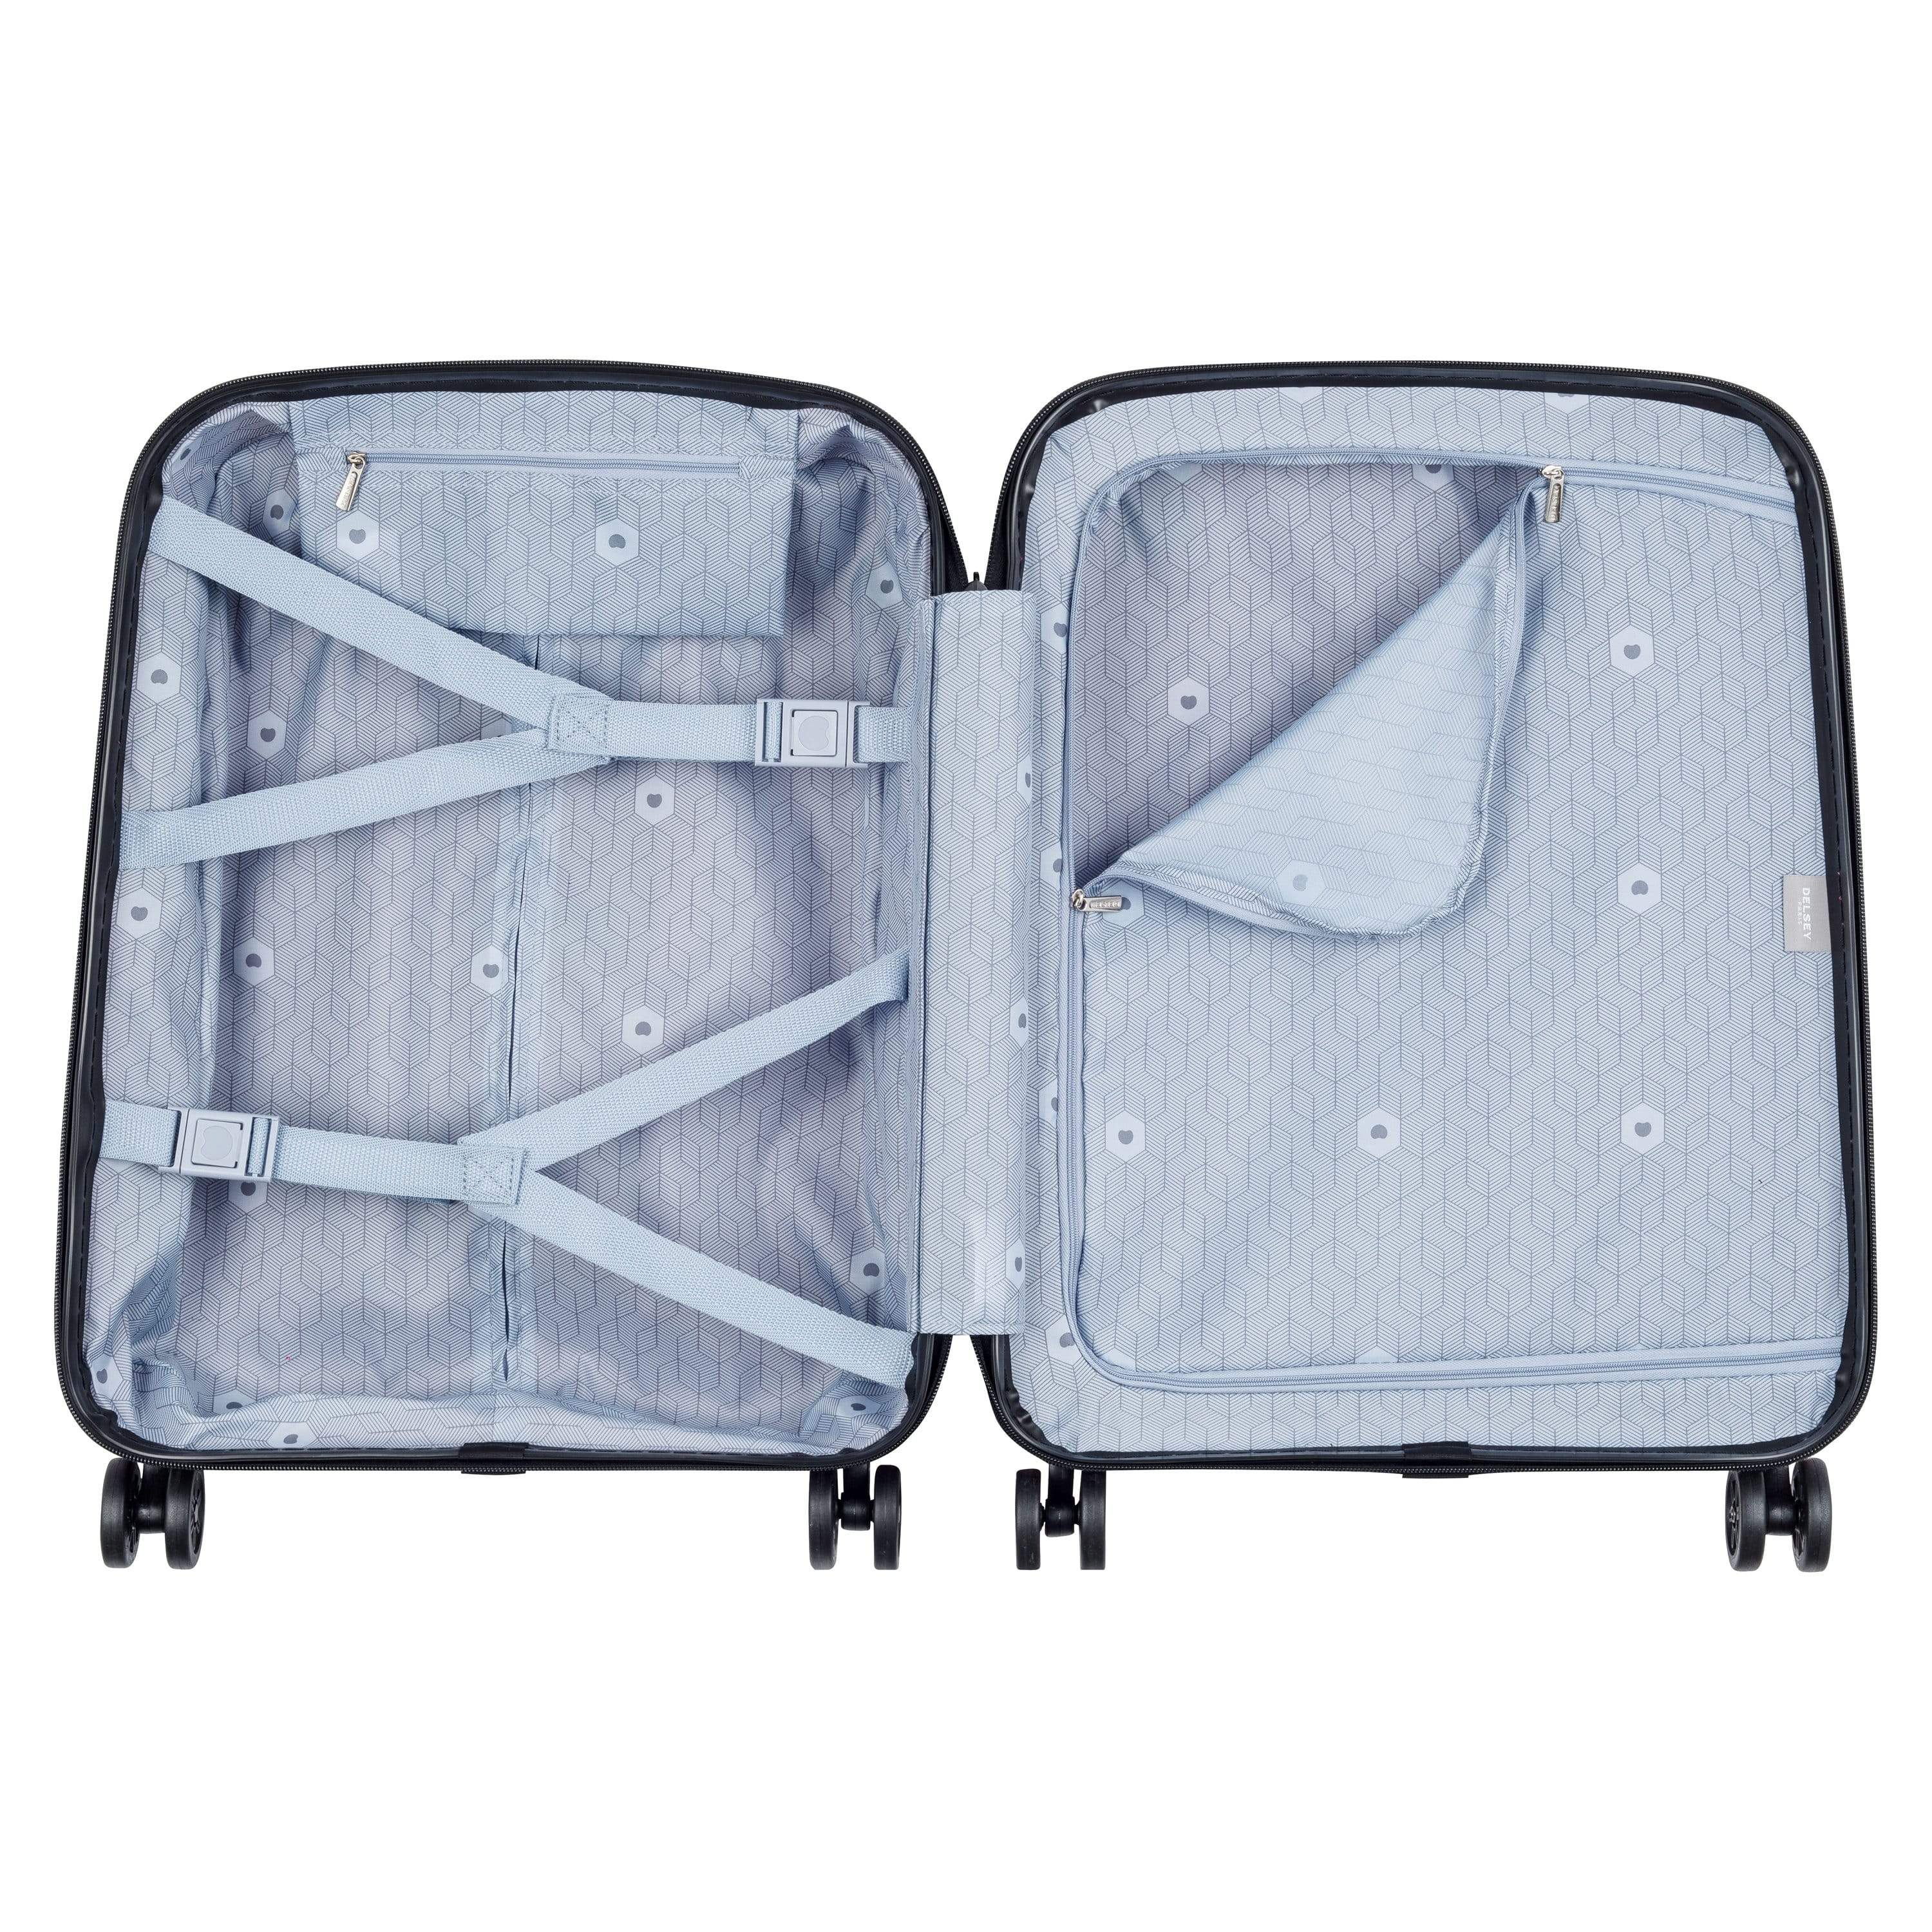 Delsey Belmont Plus 61cm Hardcase 4 Double Wheel Expandable Cabin Luggage Trolley Pink - 00386180509